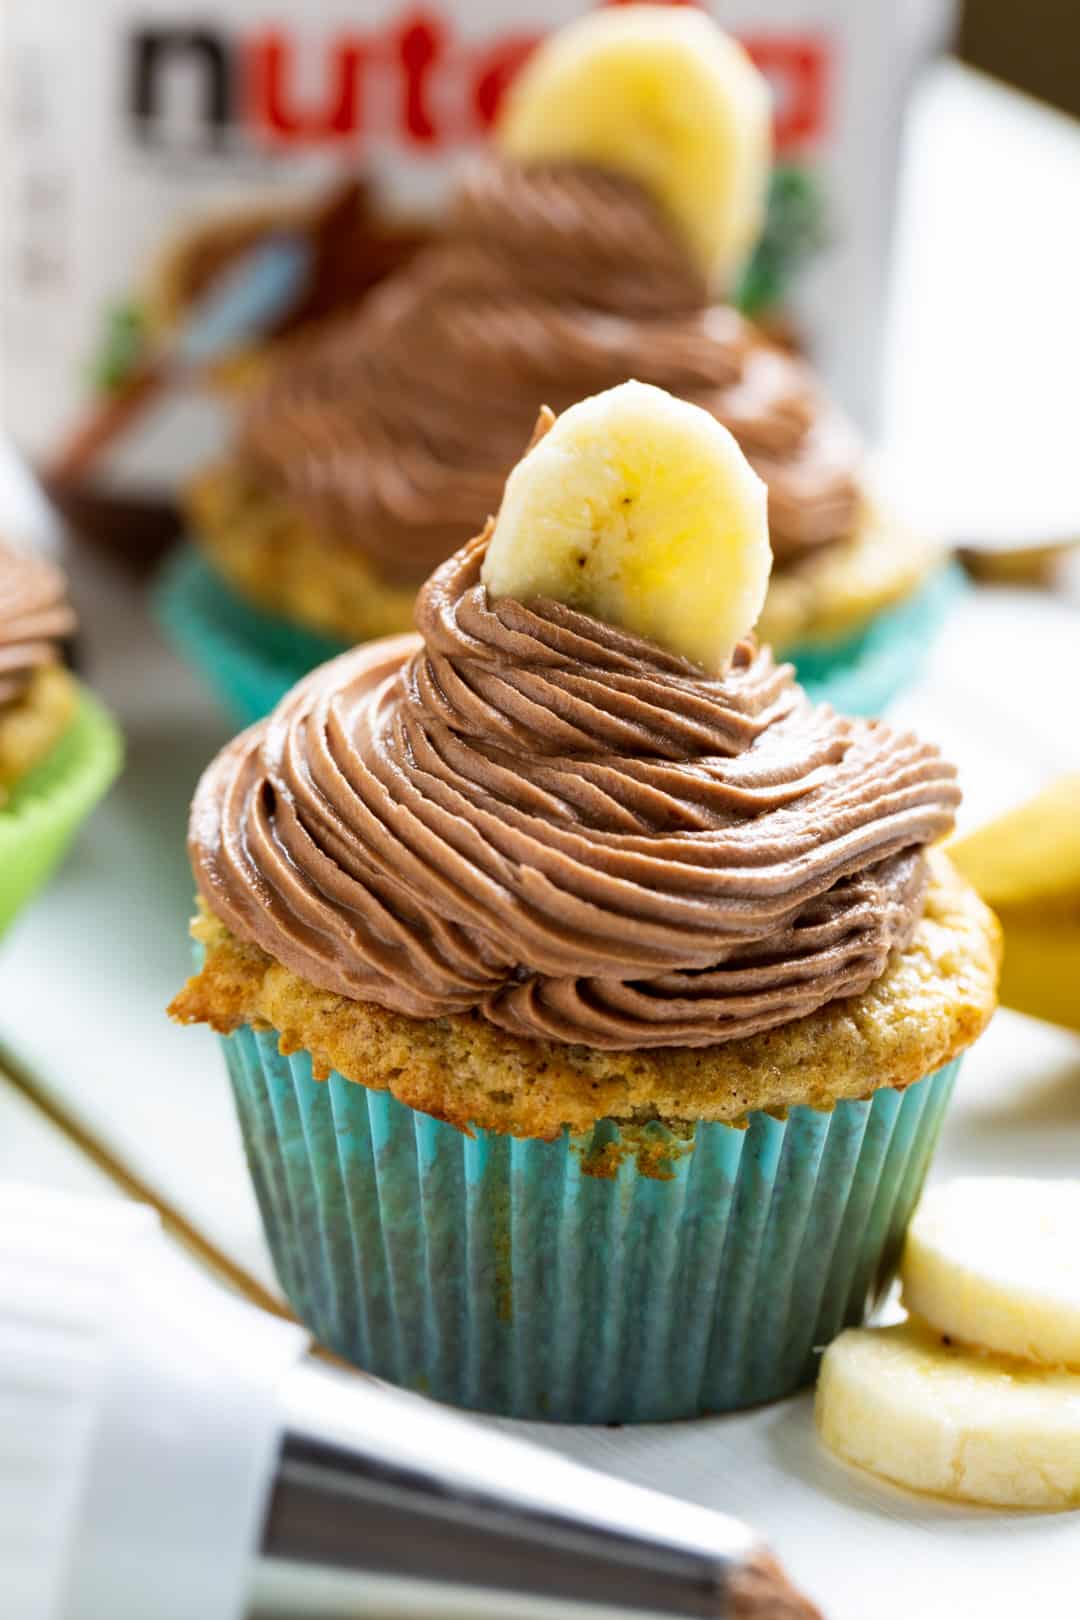 Banana Cupcakes with Nutella Frosting topped with a banana slice.